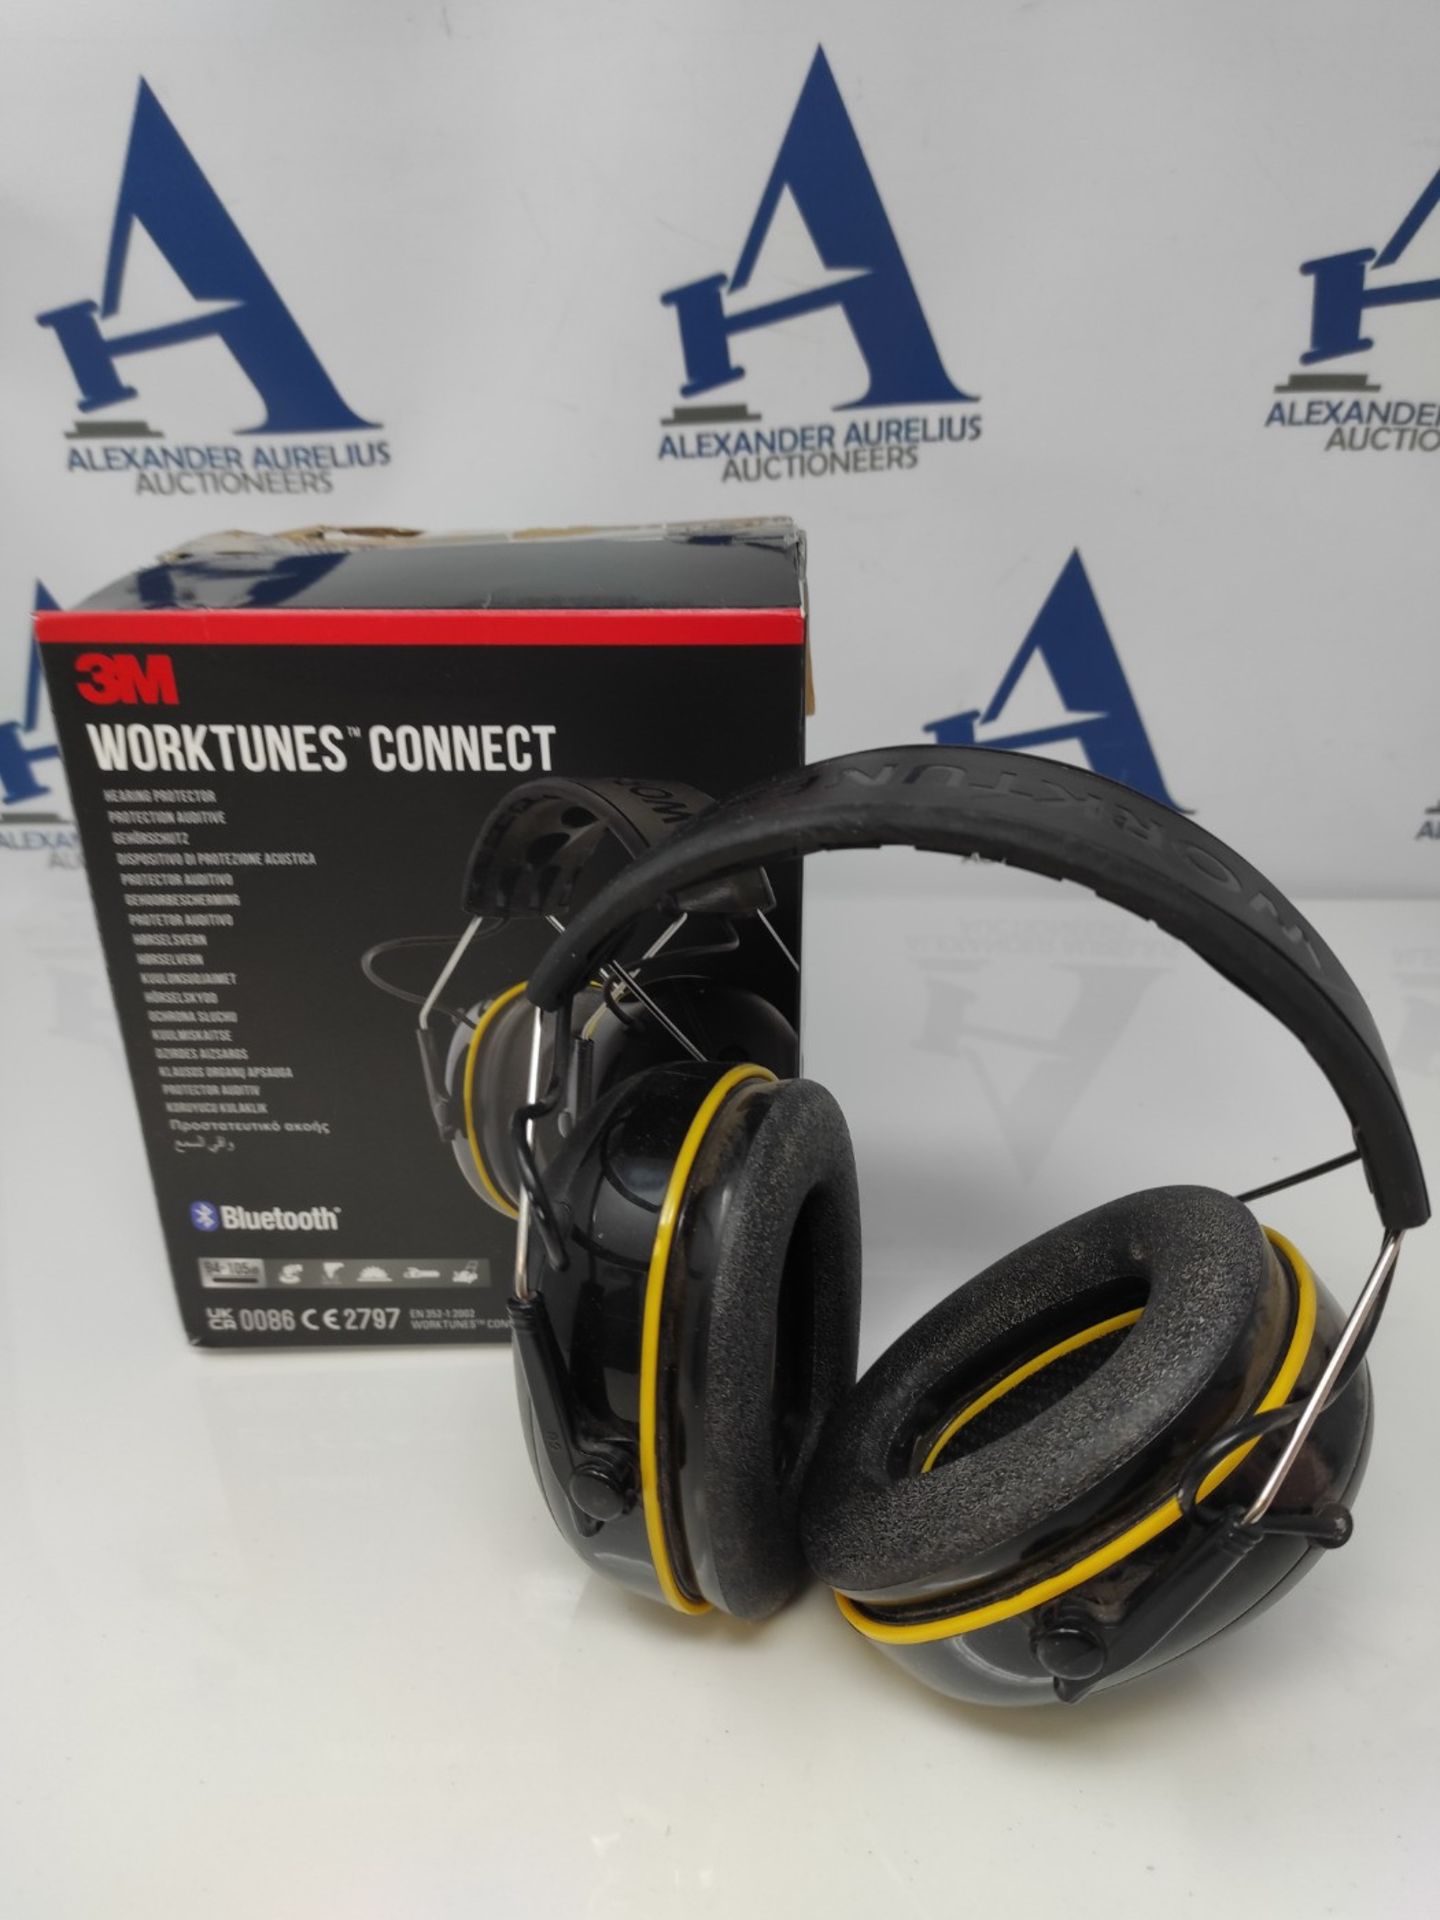 RRP £77.00 3M WorkTunes Connect, Bluetooth Ear Defenders Wireless, 90543EC1, Hearing Protector Ea - Image 2 of 2